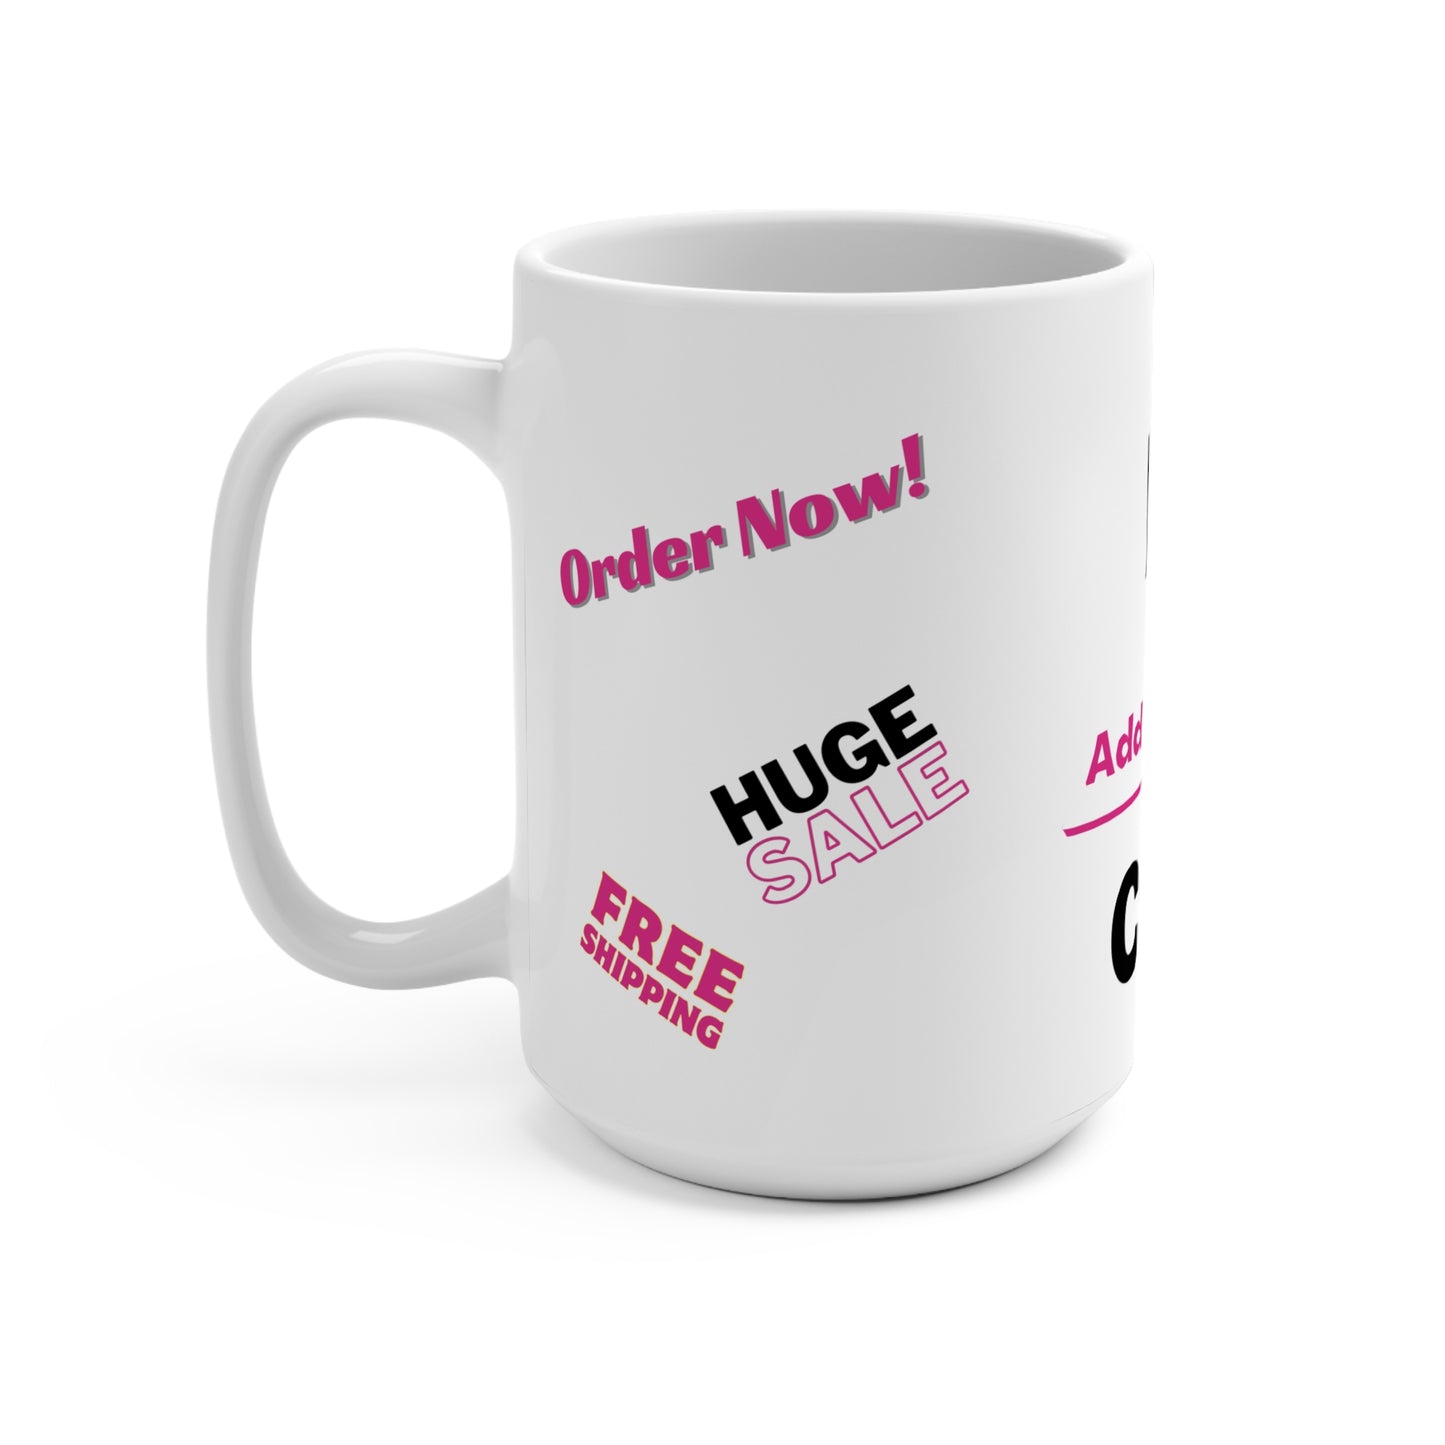 My Add To Cart Cup 15oz